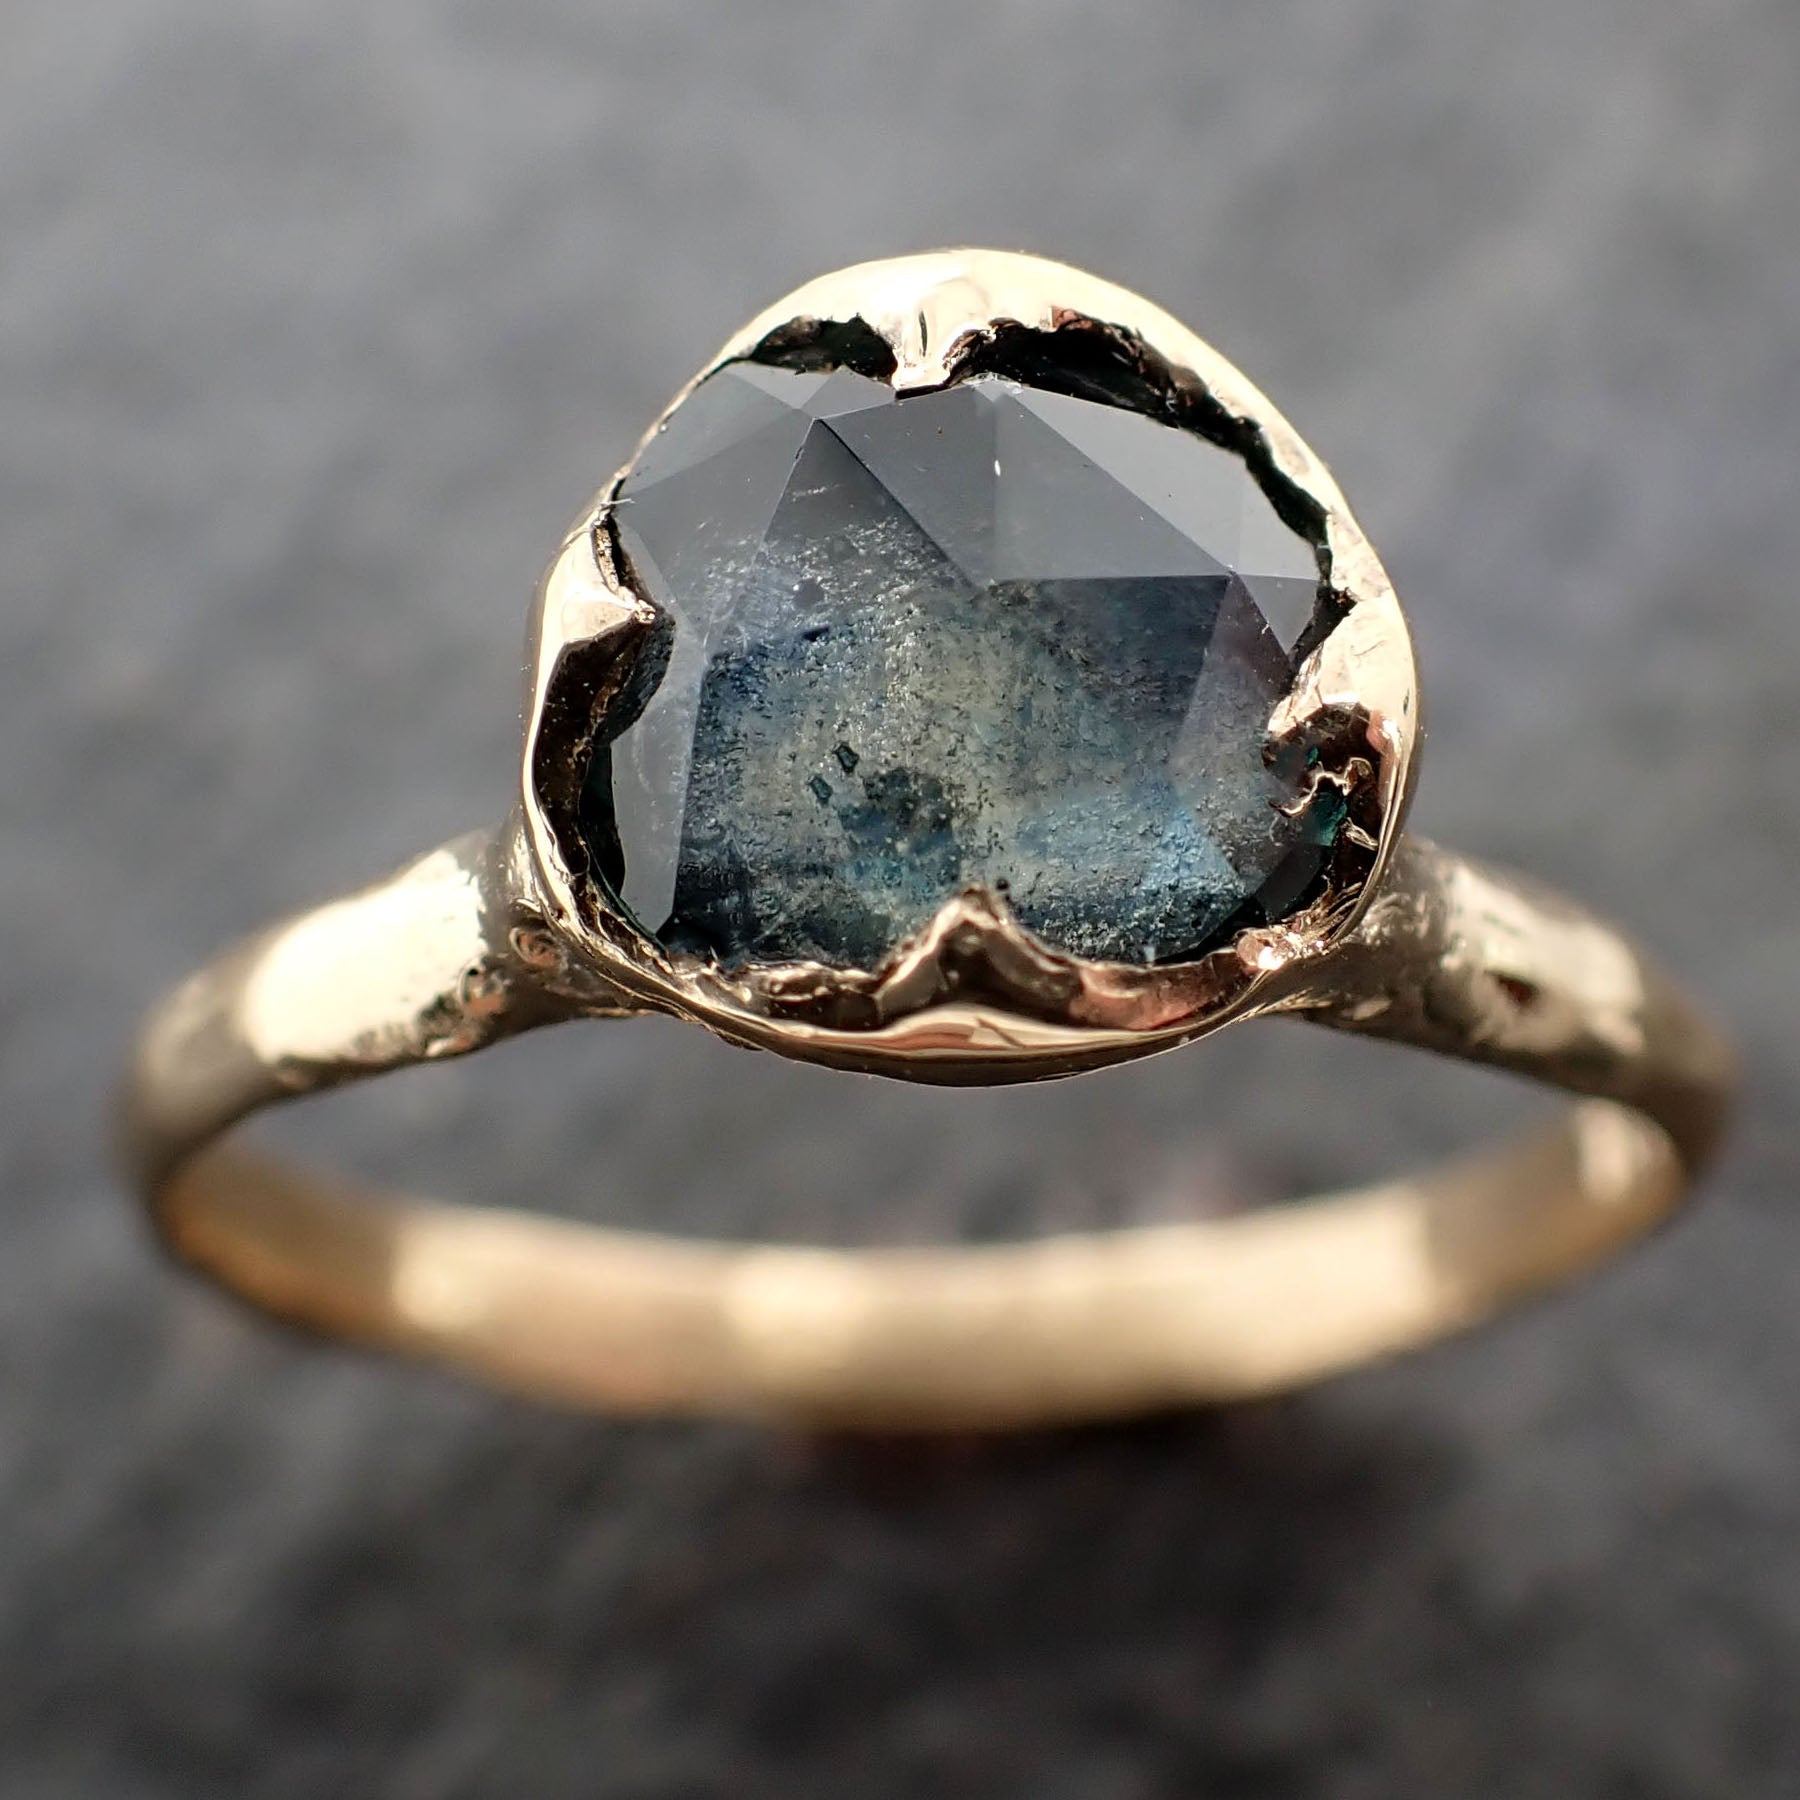 fancy cut montana blue sapphire 18k yellow gold solitaire ring gold gemstone engagement ring 2614 Alternative Engagement